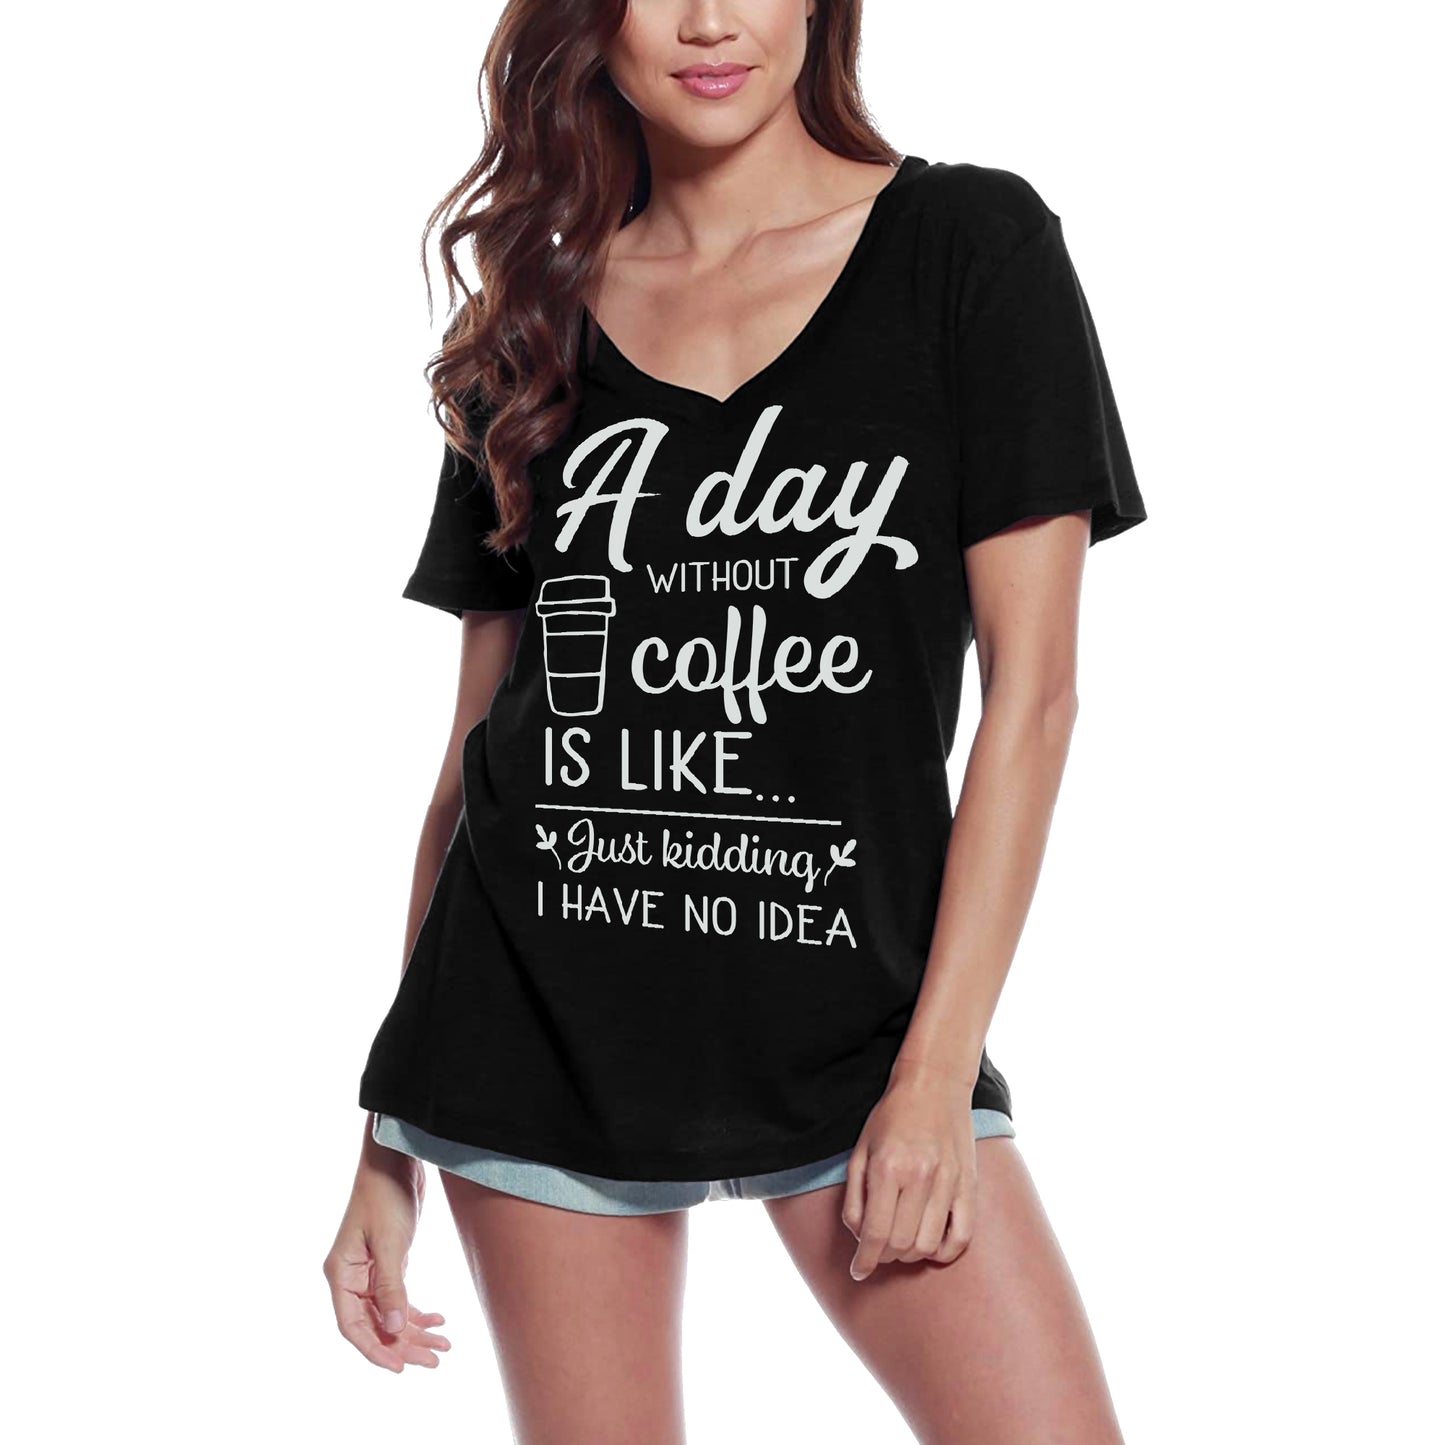 ULTRABASIC Women's T-Shirt A Day Without Coffee is Like - Funny Tee Shirt Tops